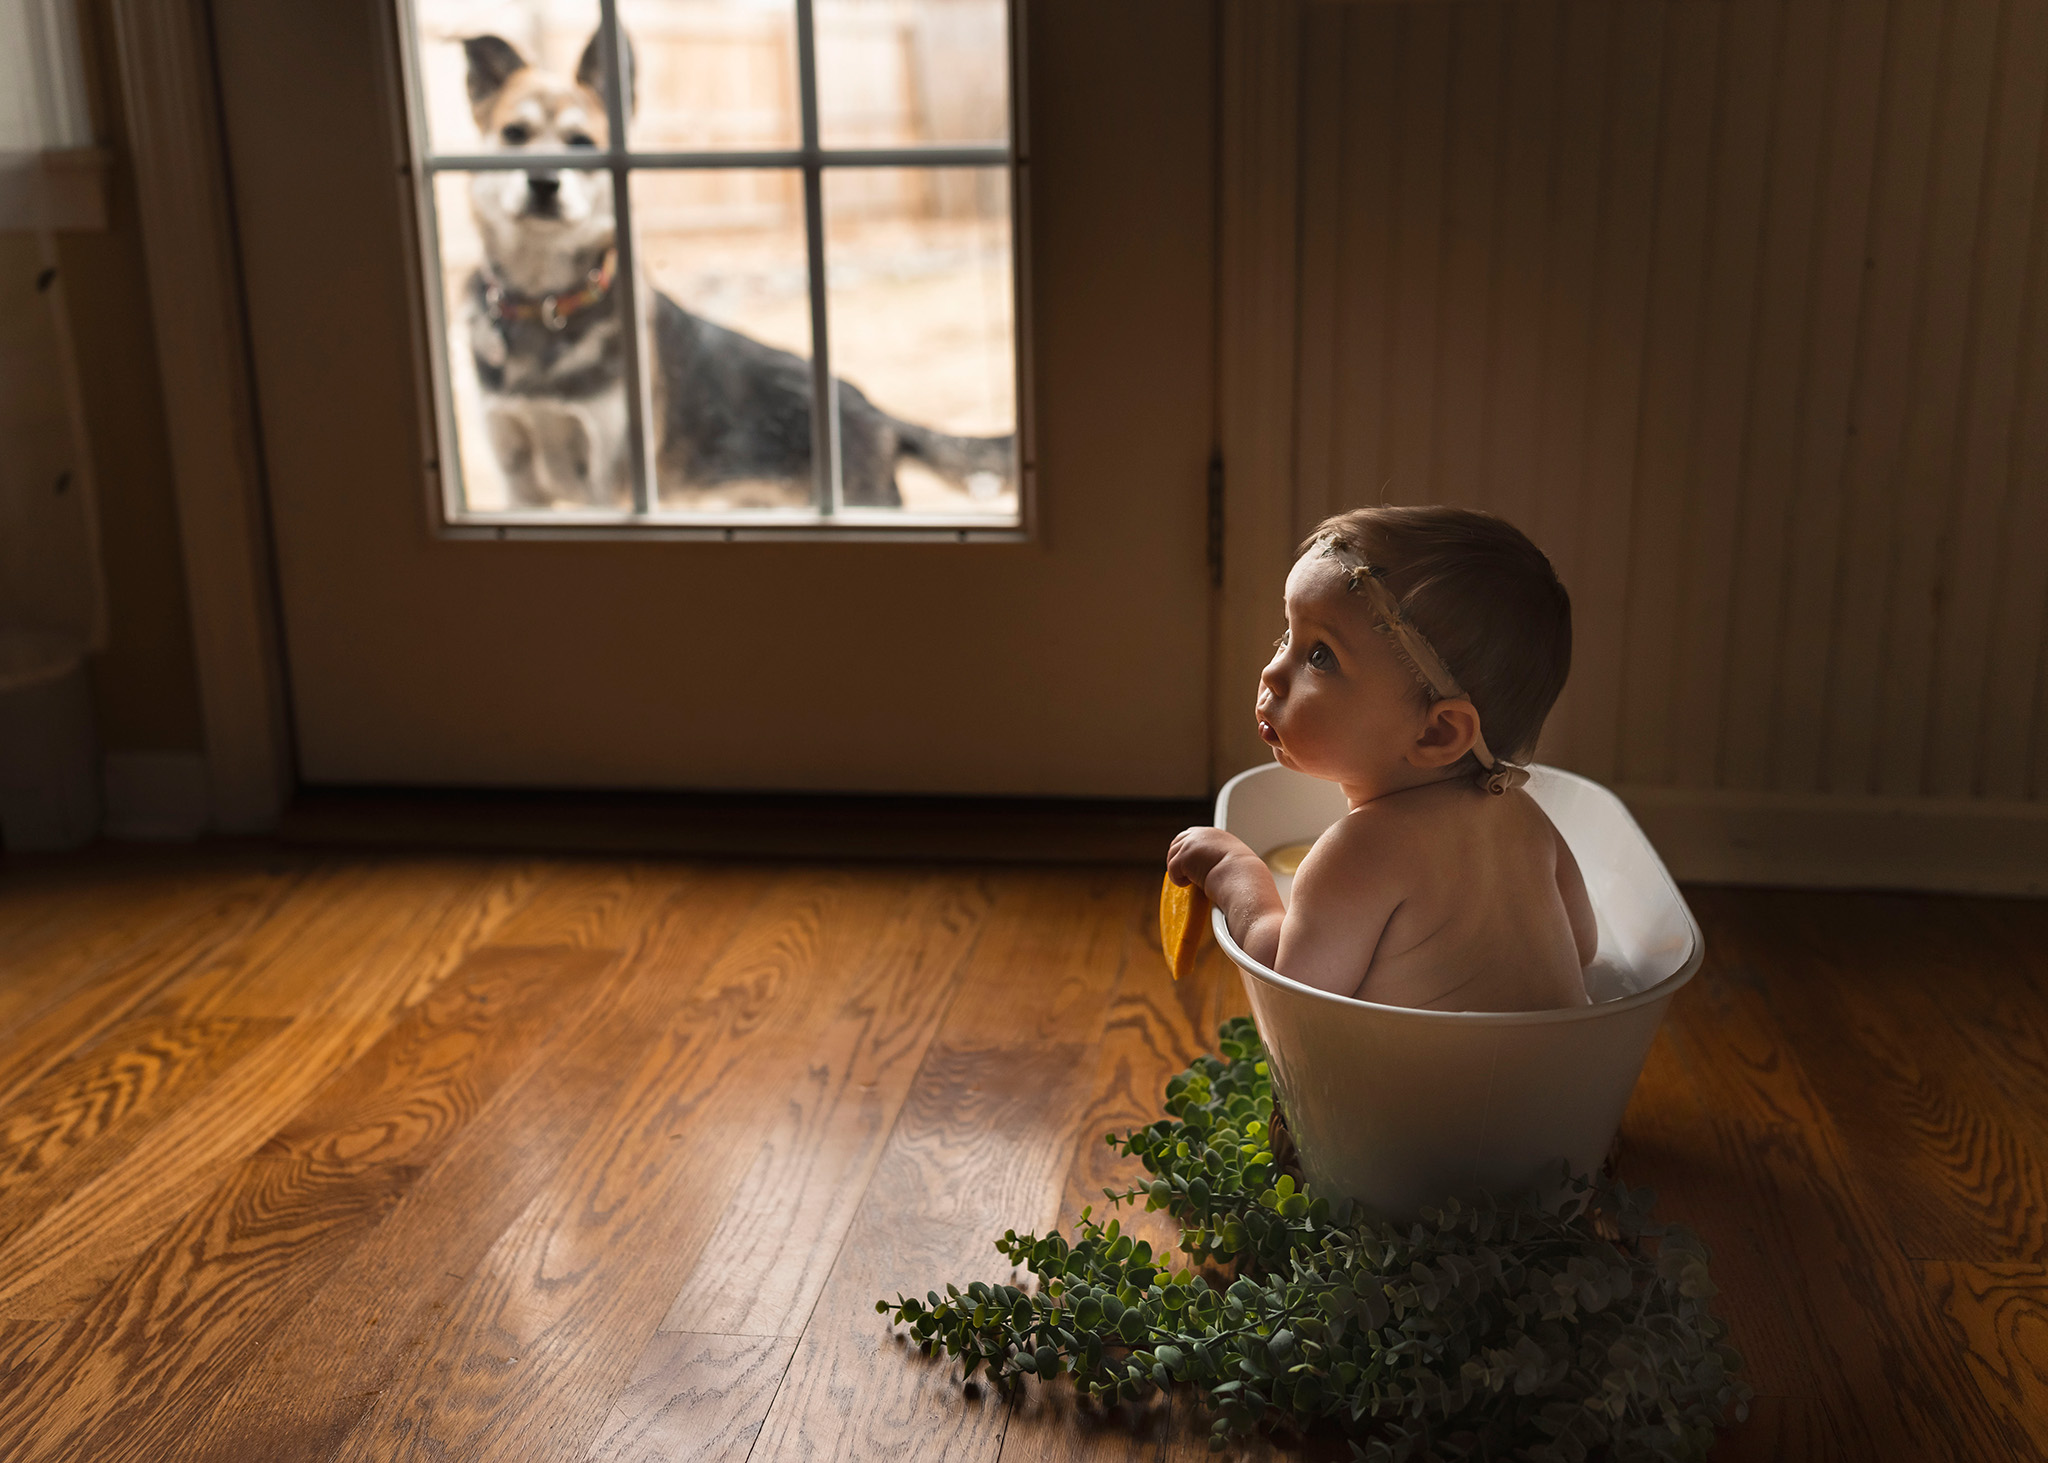 Baby looks up as dog watches the NJ Milk Bath Photography session